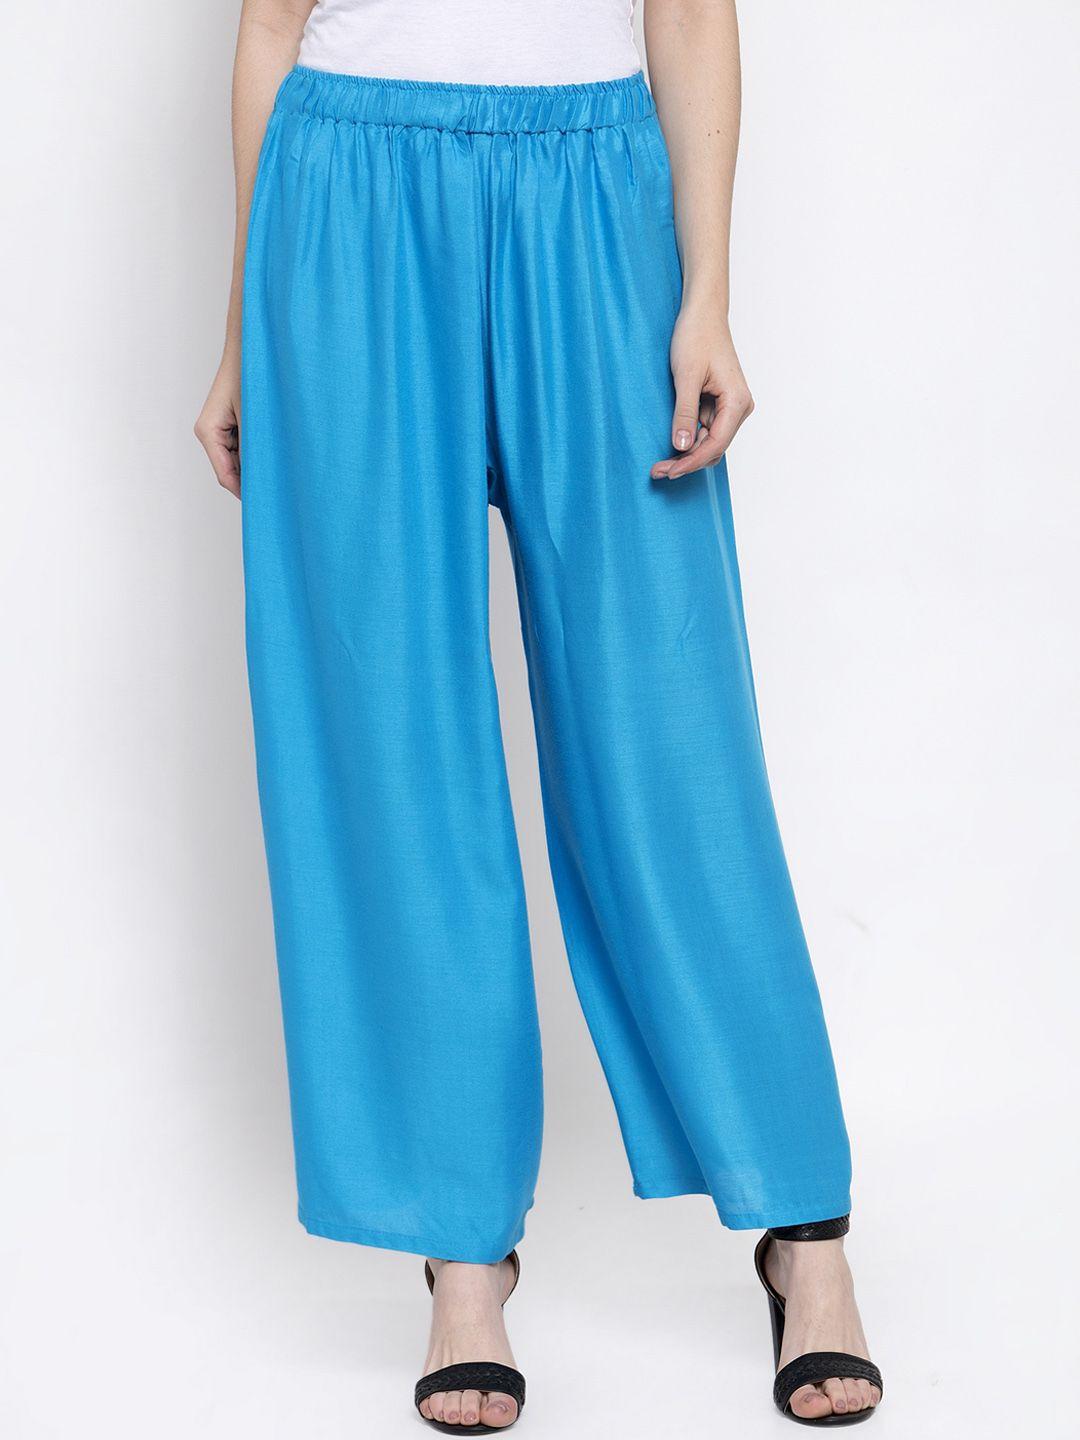 tag 7 women blue solid flared palazzos